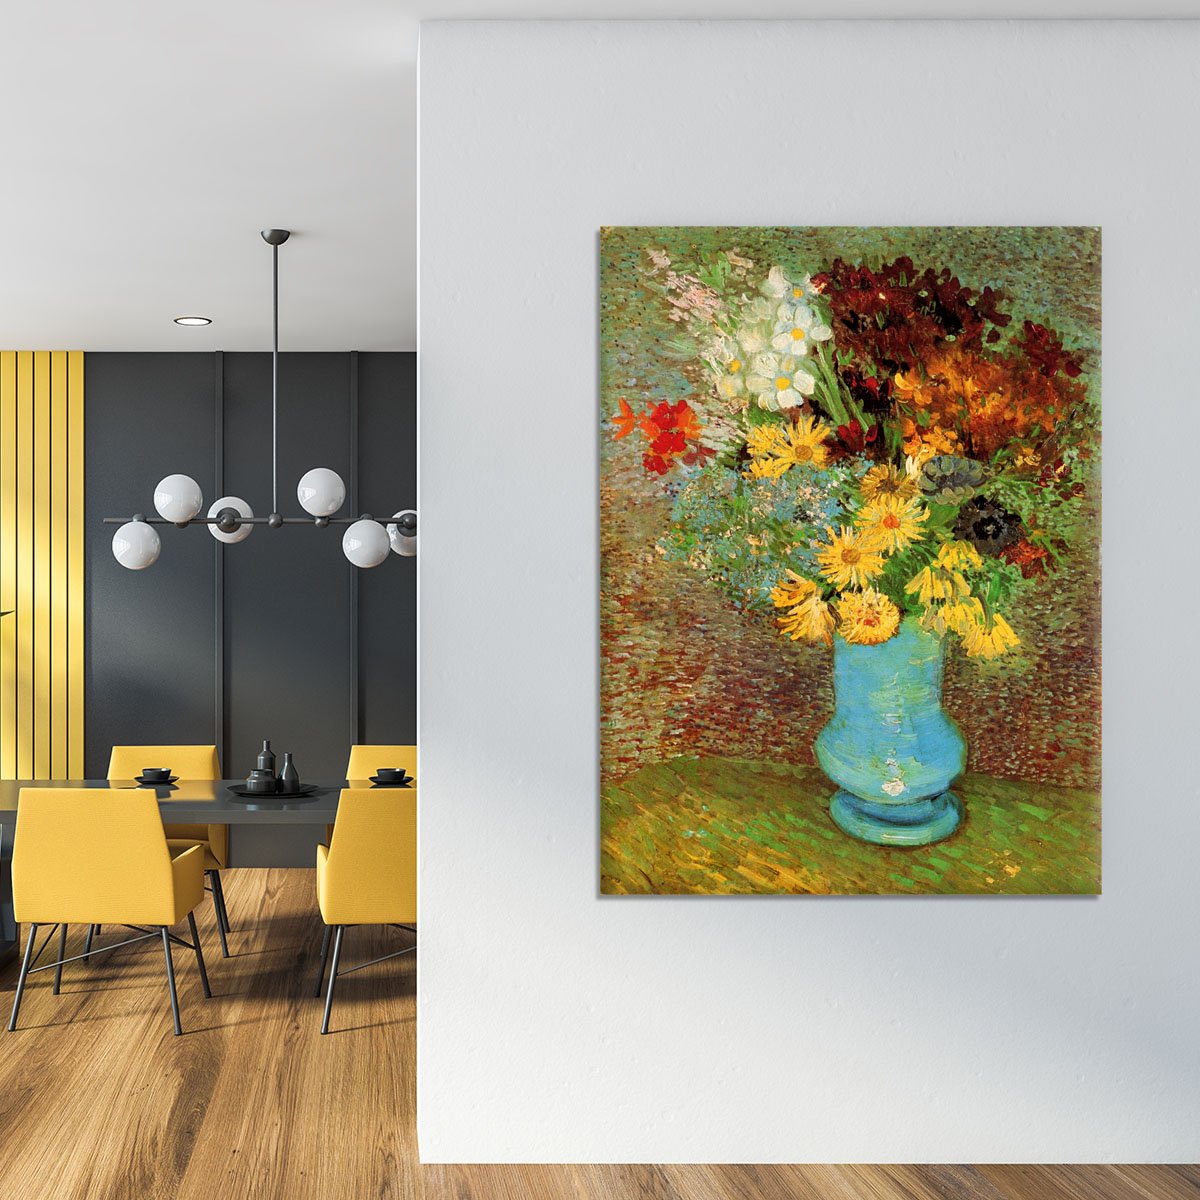 Vase with Daisies and Anemones by Van Gogh Canvas Print or Poster